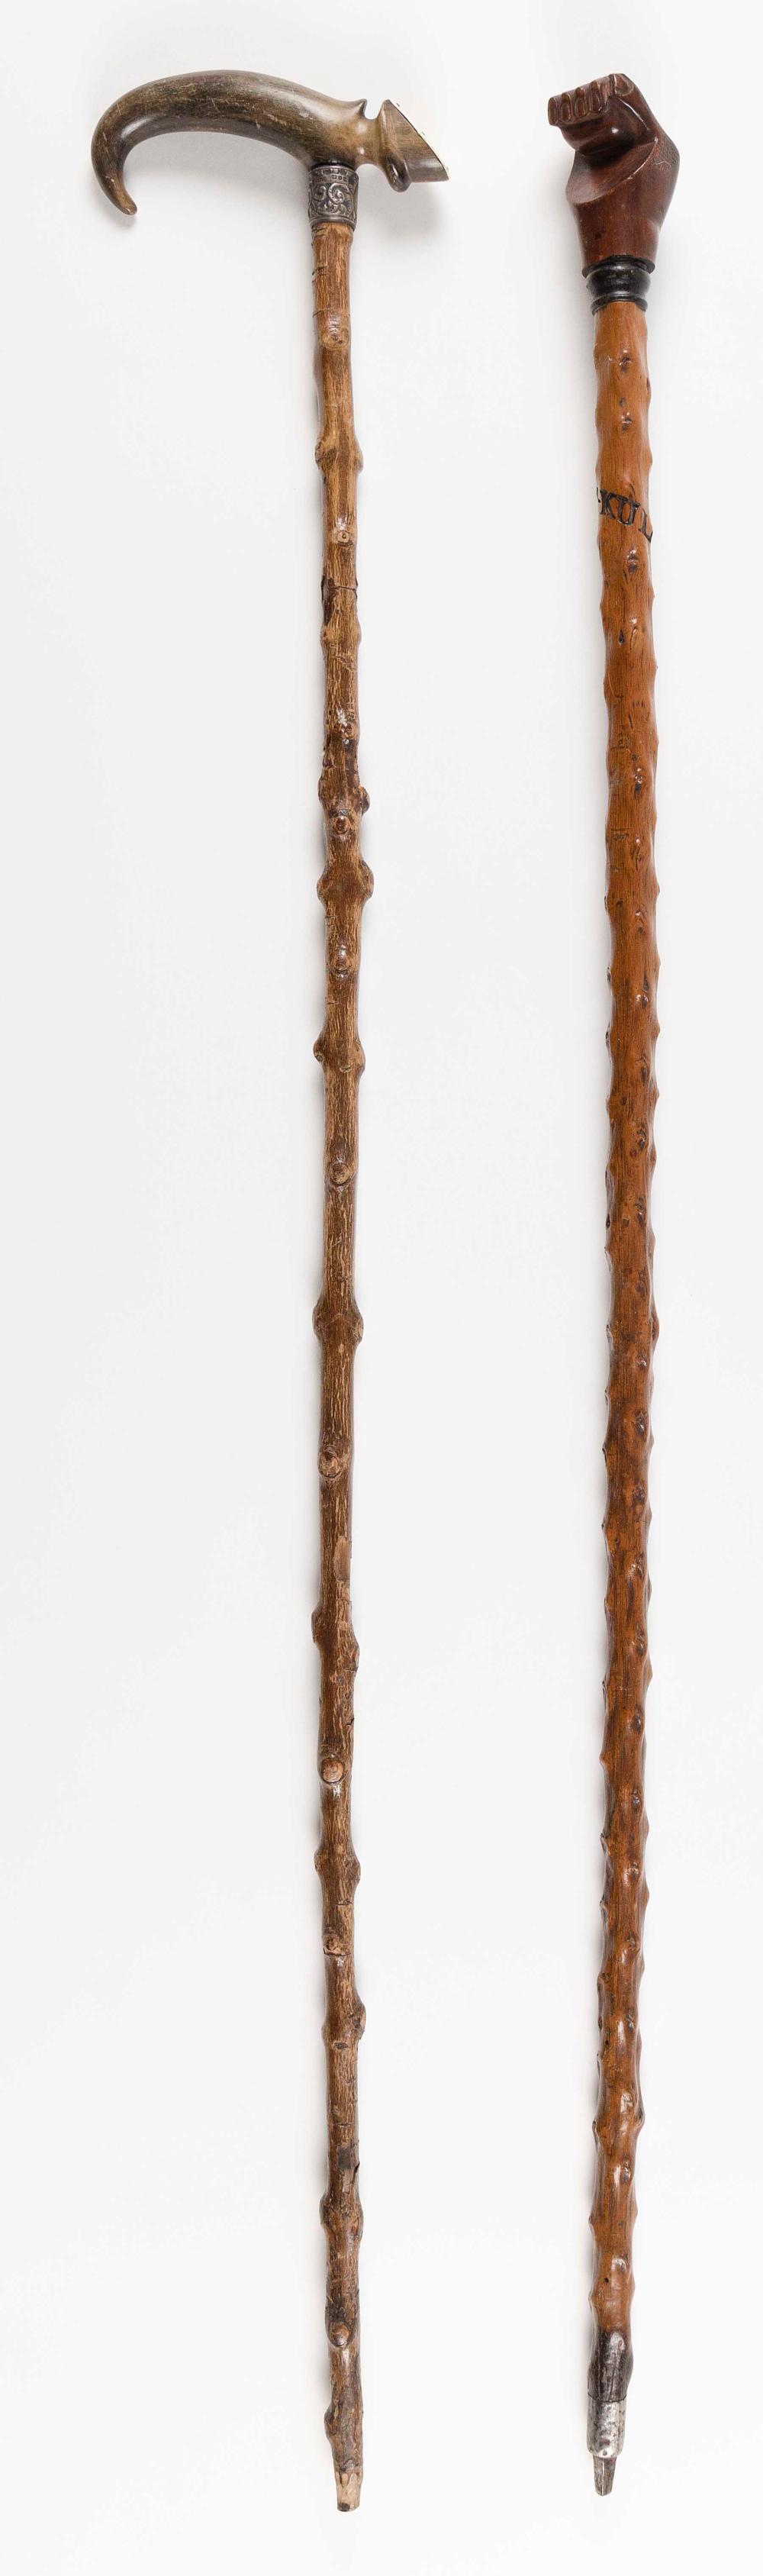 TWO WALKING STICKS LATE 19TH/EARLY